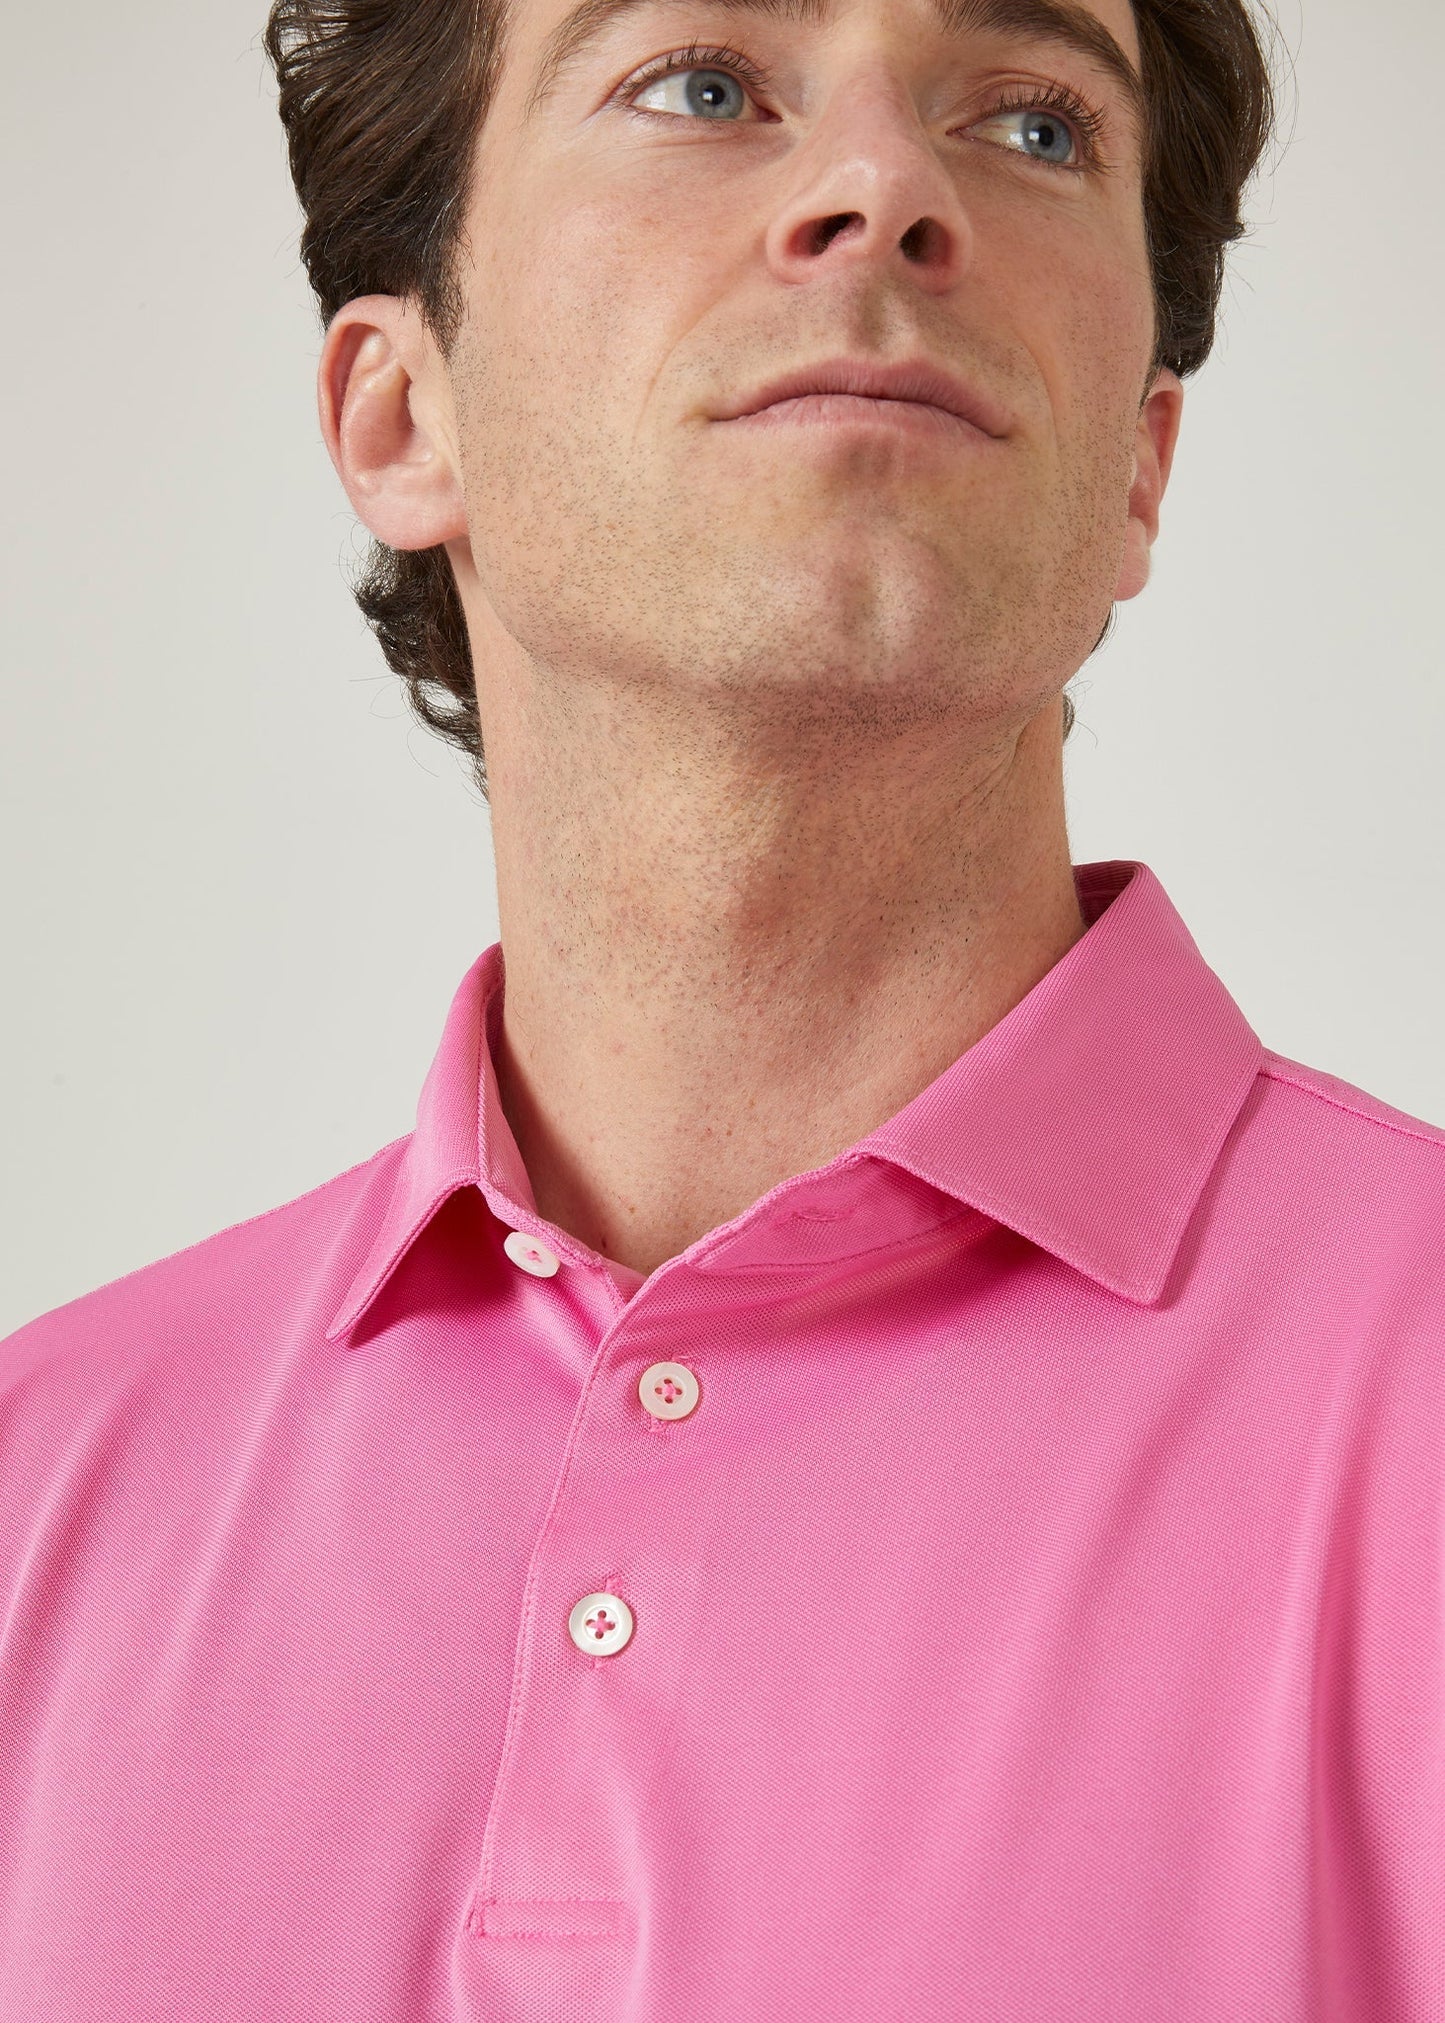 Men's 3 button polo shirt in carnation pink.